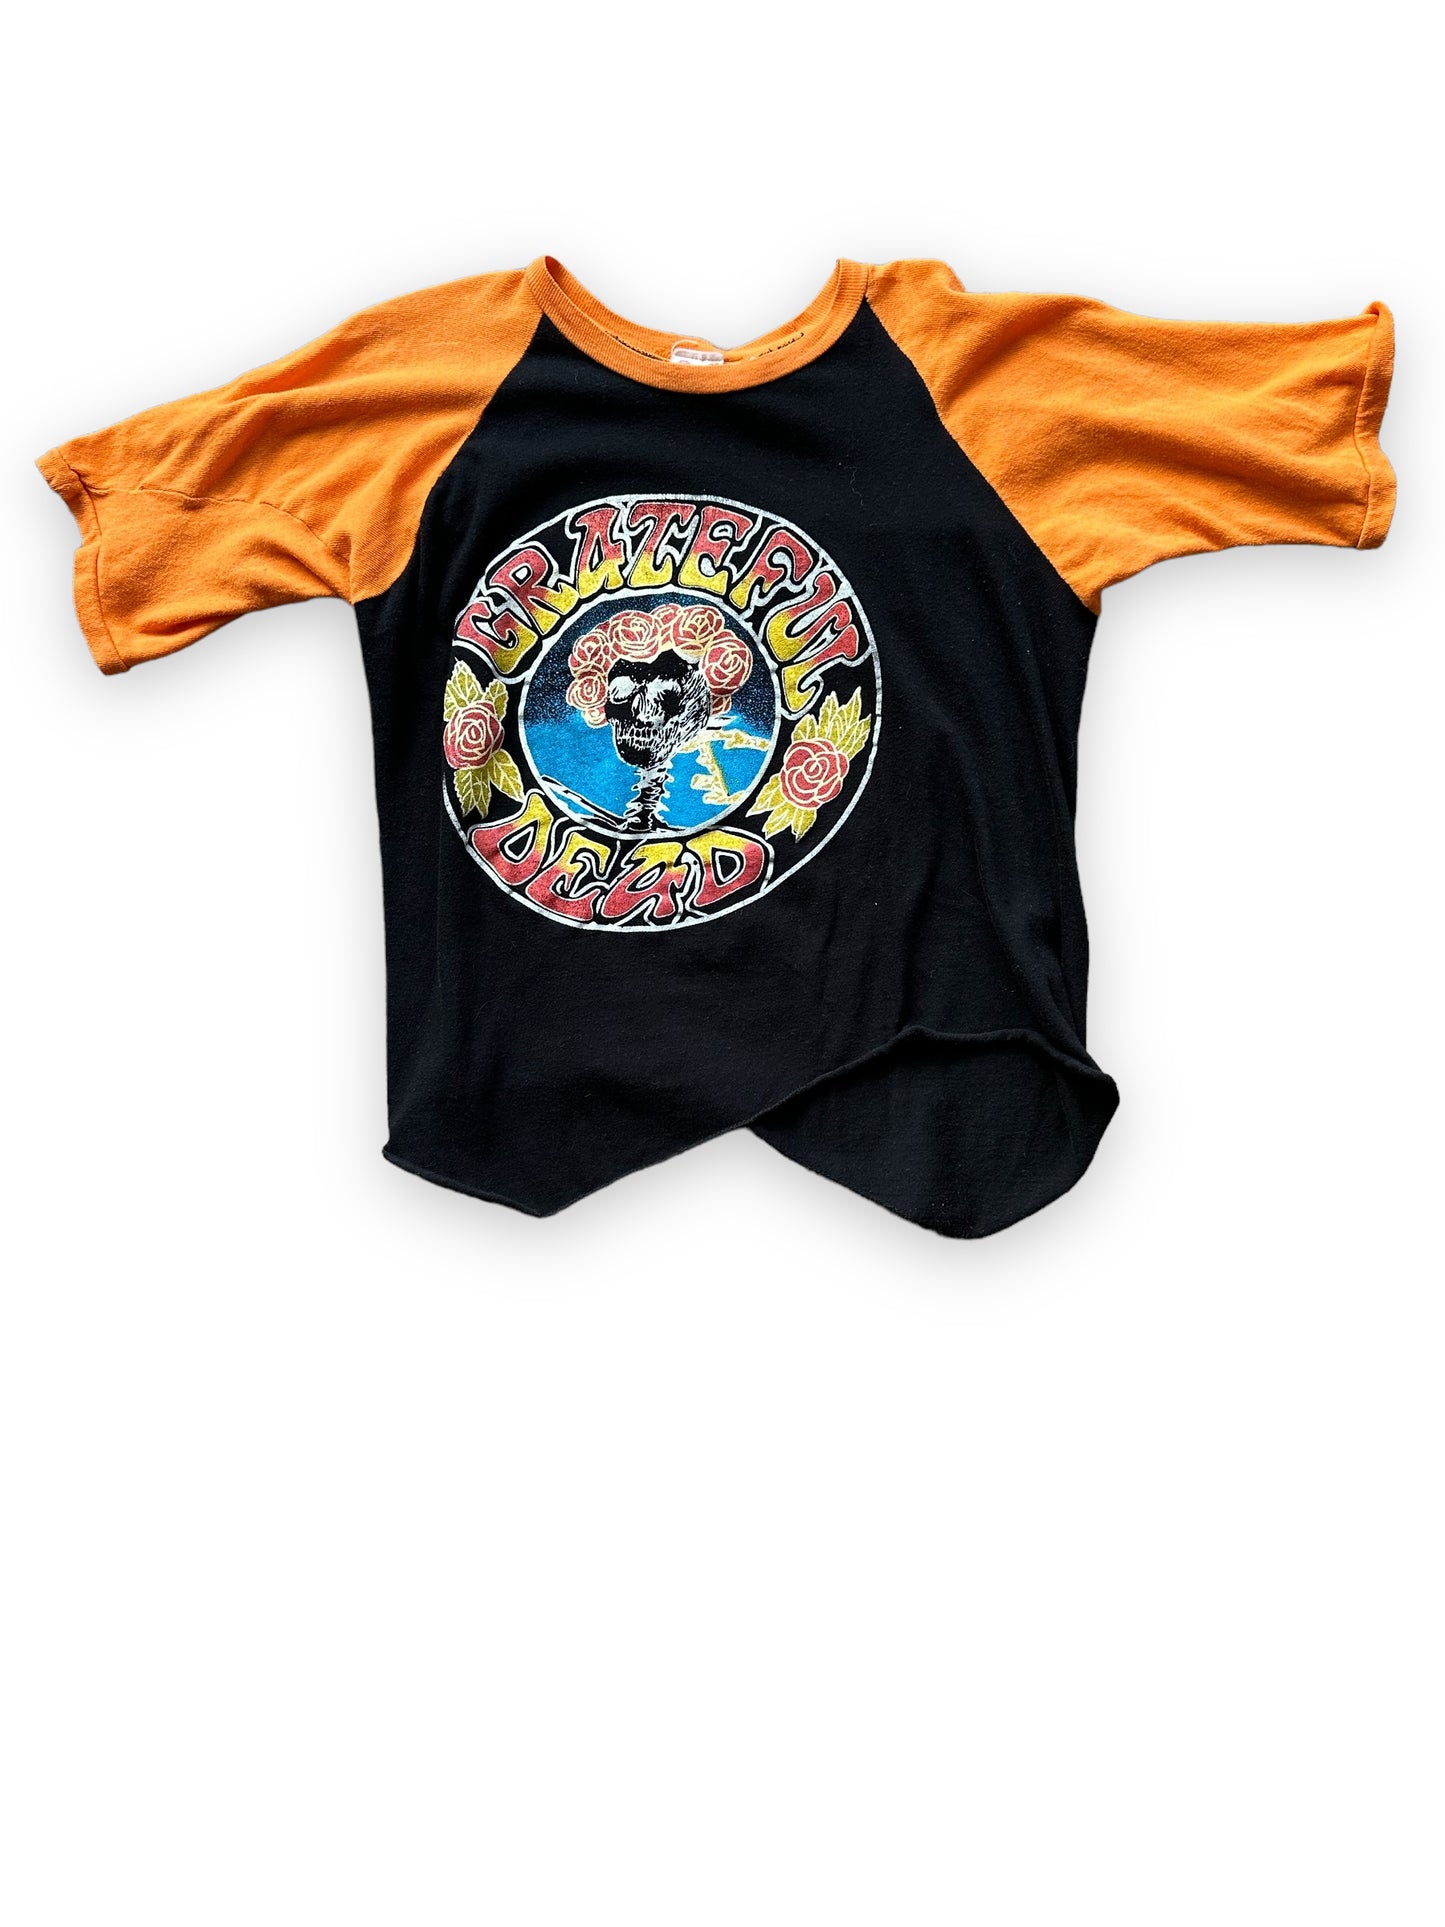 Front View of Vintage Grateful Dead Two-Sided Raglan Tee SZ M  |  Vintage Grateful Dead Tee Seattle | Barn Owl Vintage